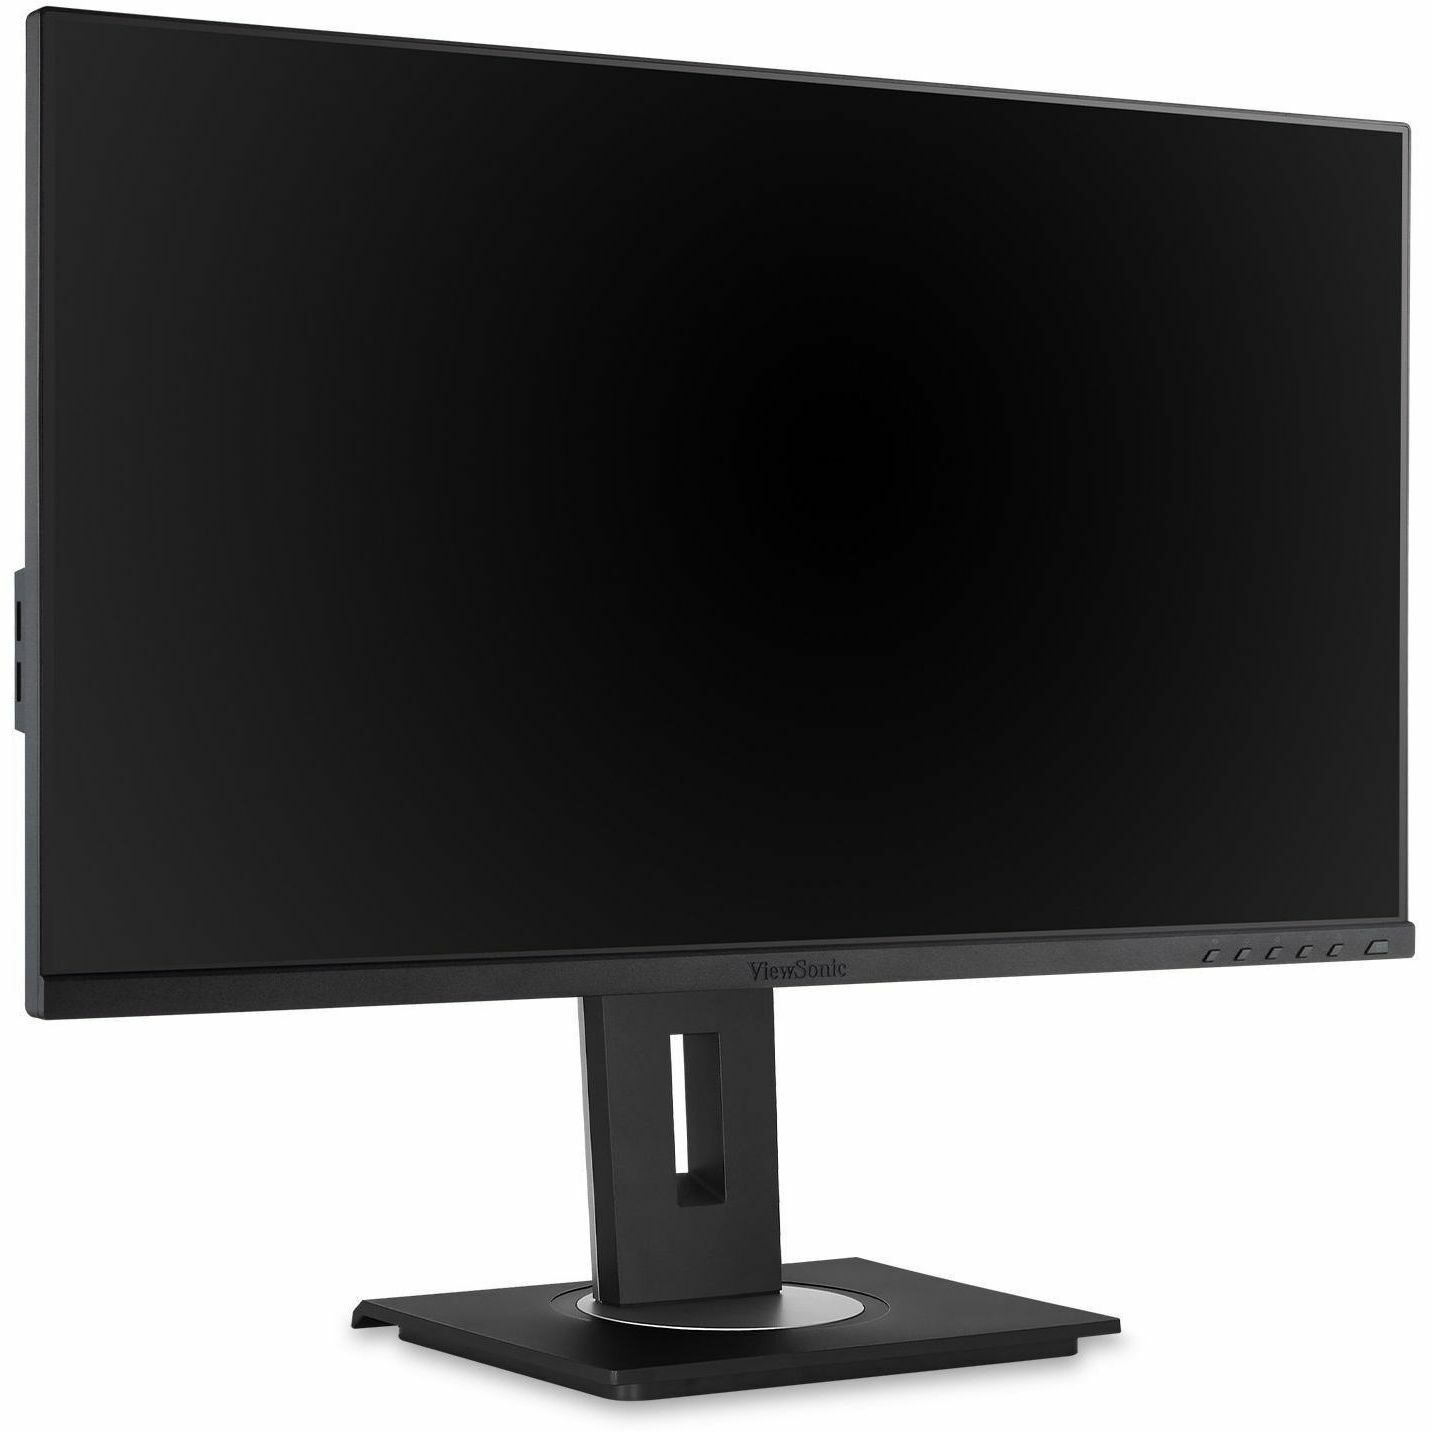 ViewSonic VG275 27 Inch IPS 1080p Monitor Designed for Surface with advanced ergonomics, 60W USB C, HDMI and DisplayPort inputs for Home and Office